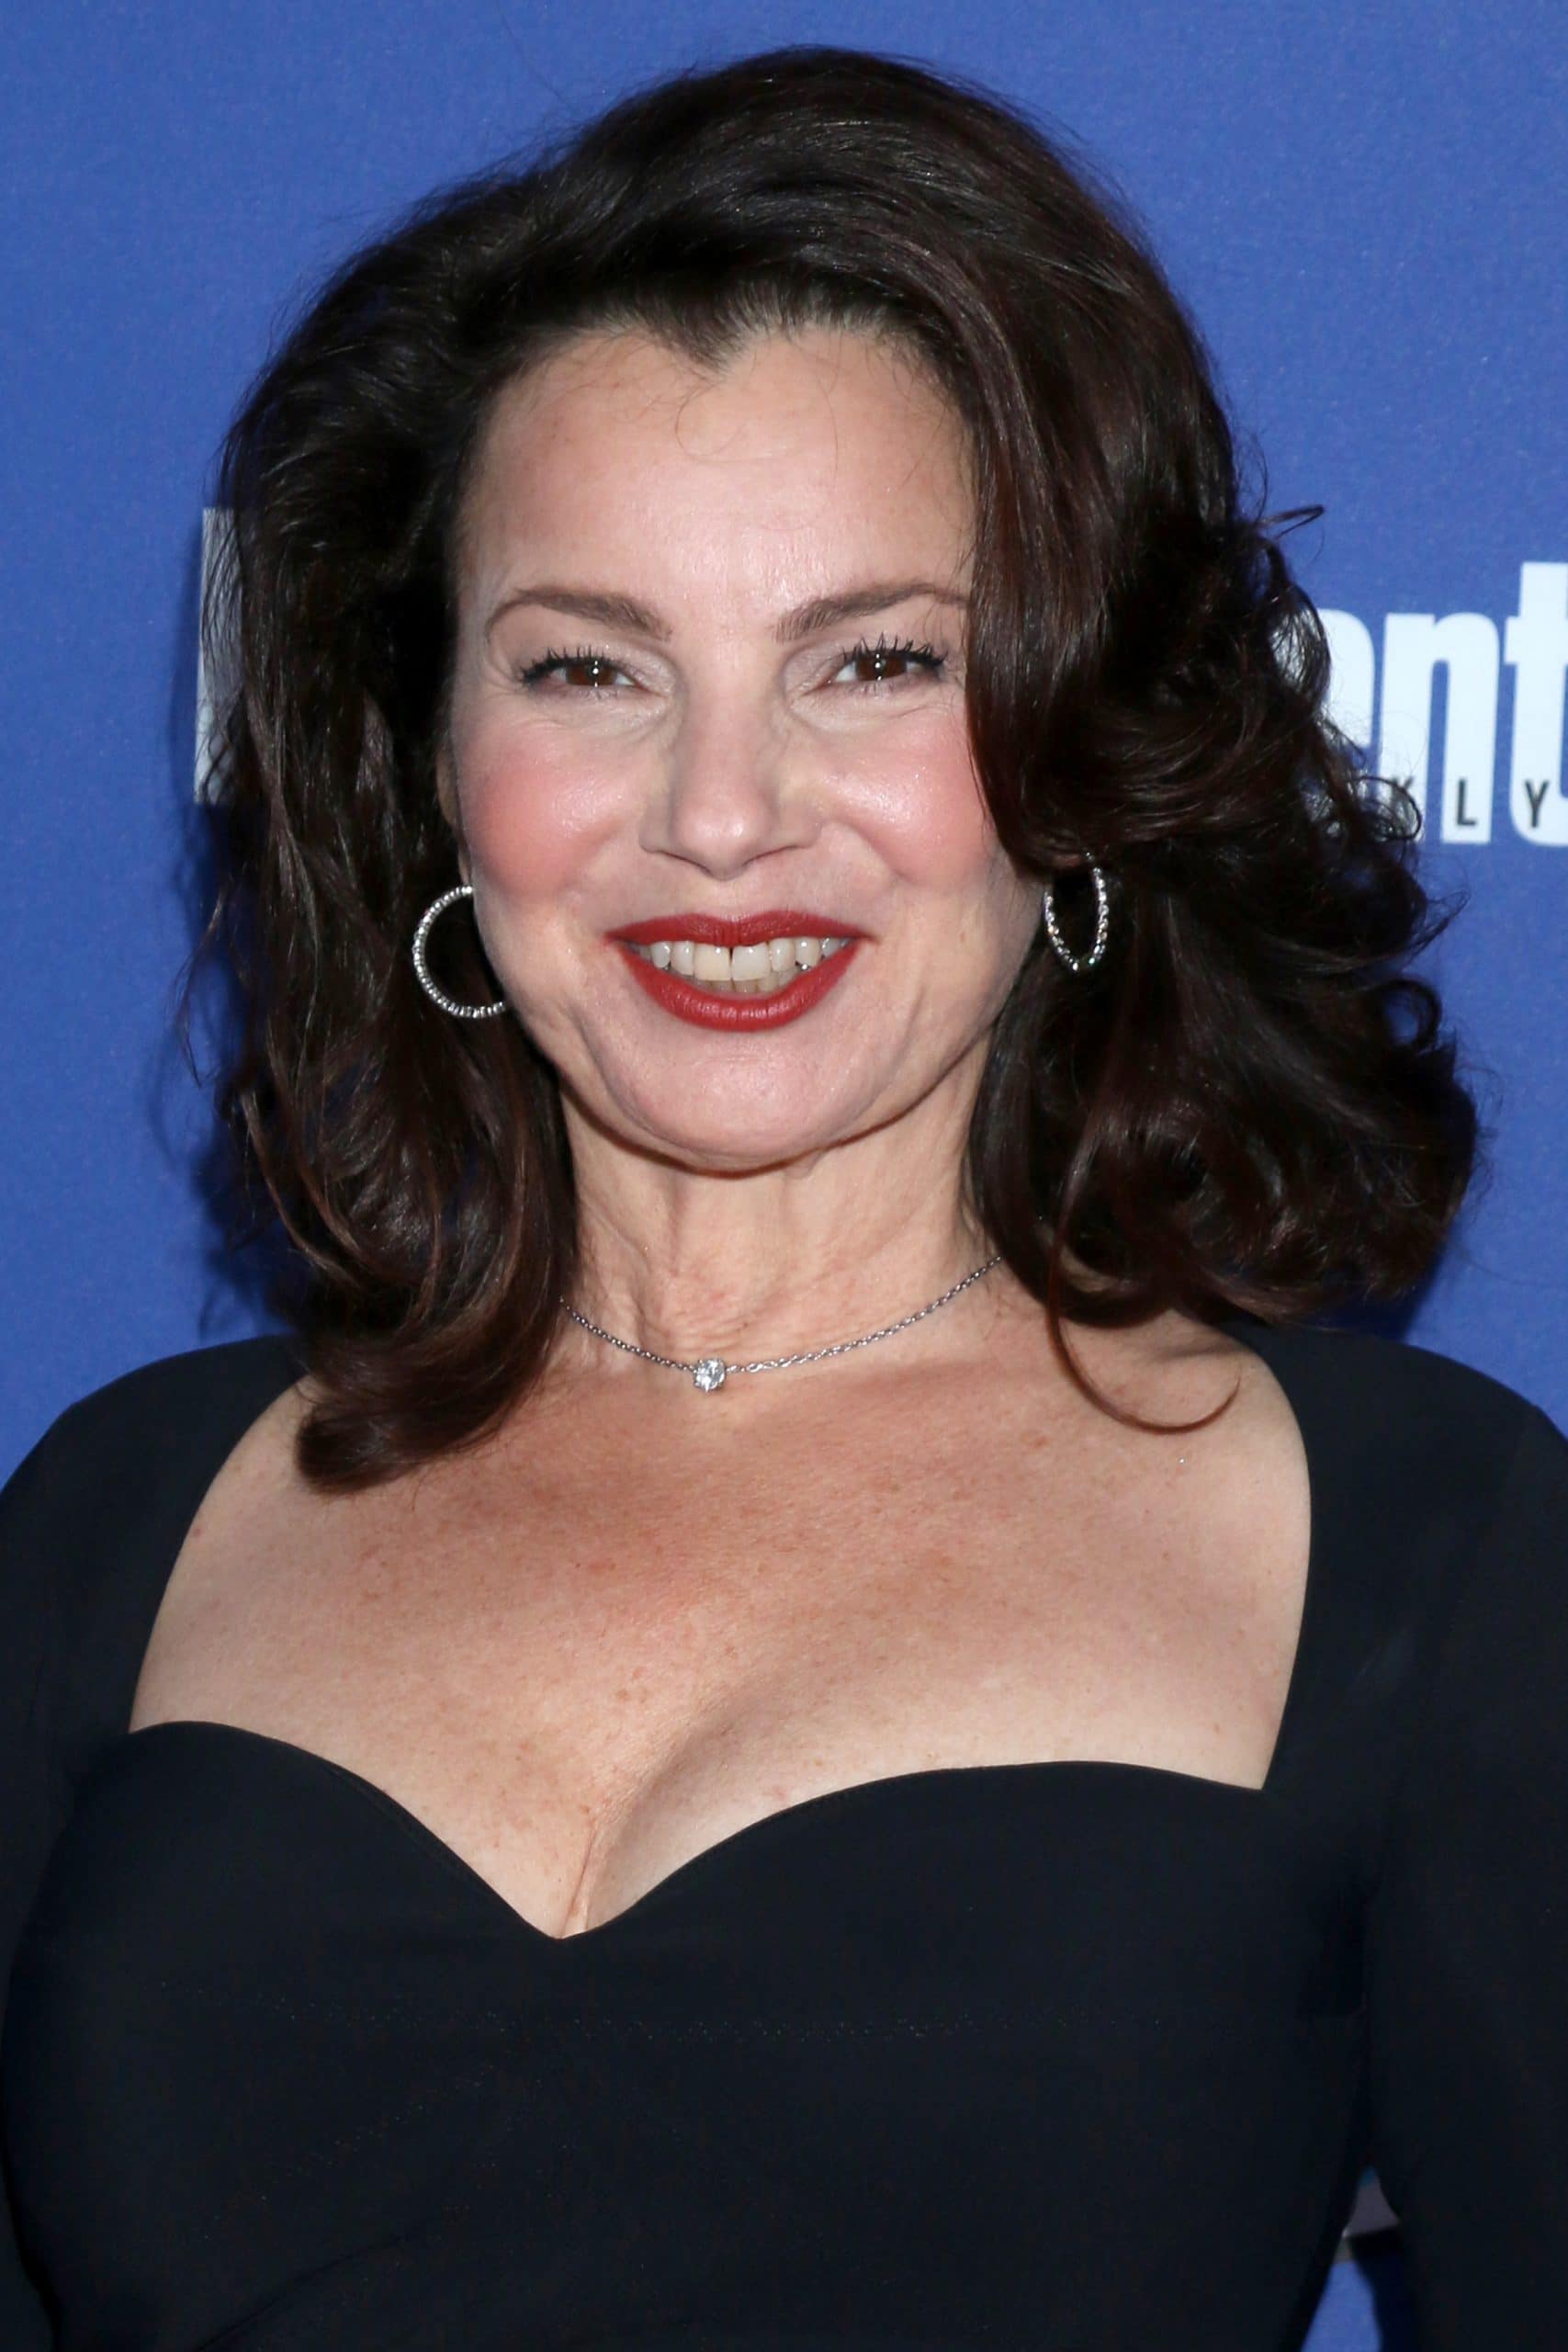 'The Nanny's Fran Drescher Discusses Opens Up About 1985 Home Invasion